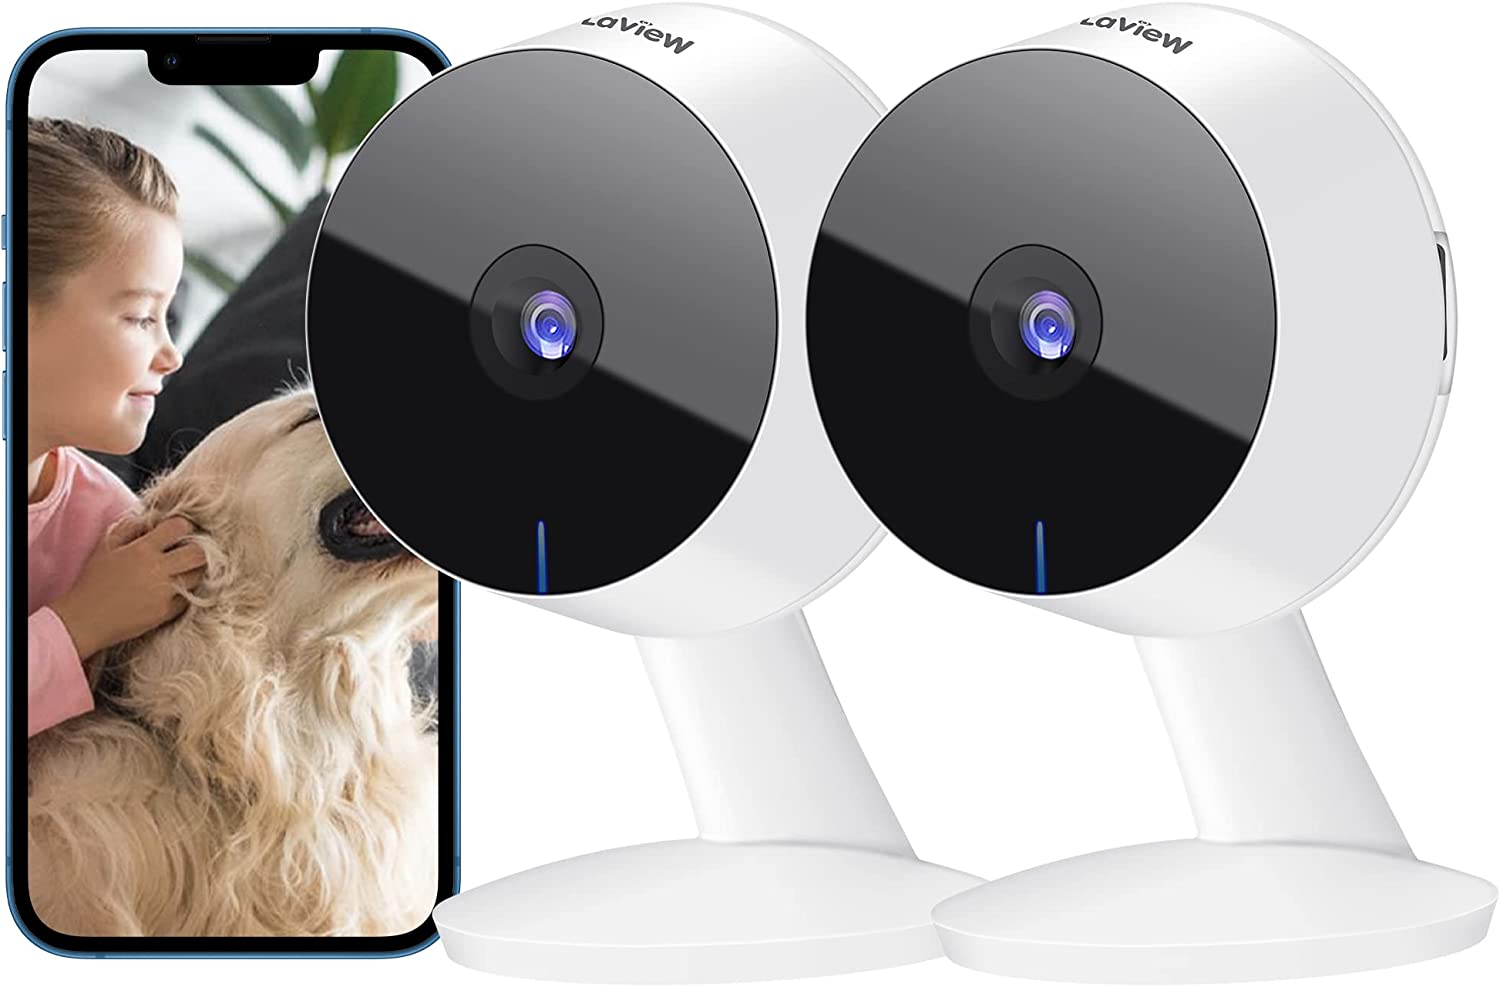 Laview Live Streaming Stylish Security Camera